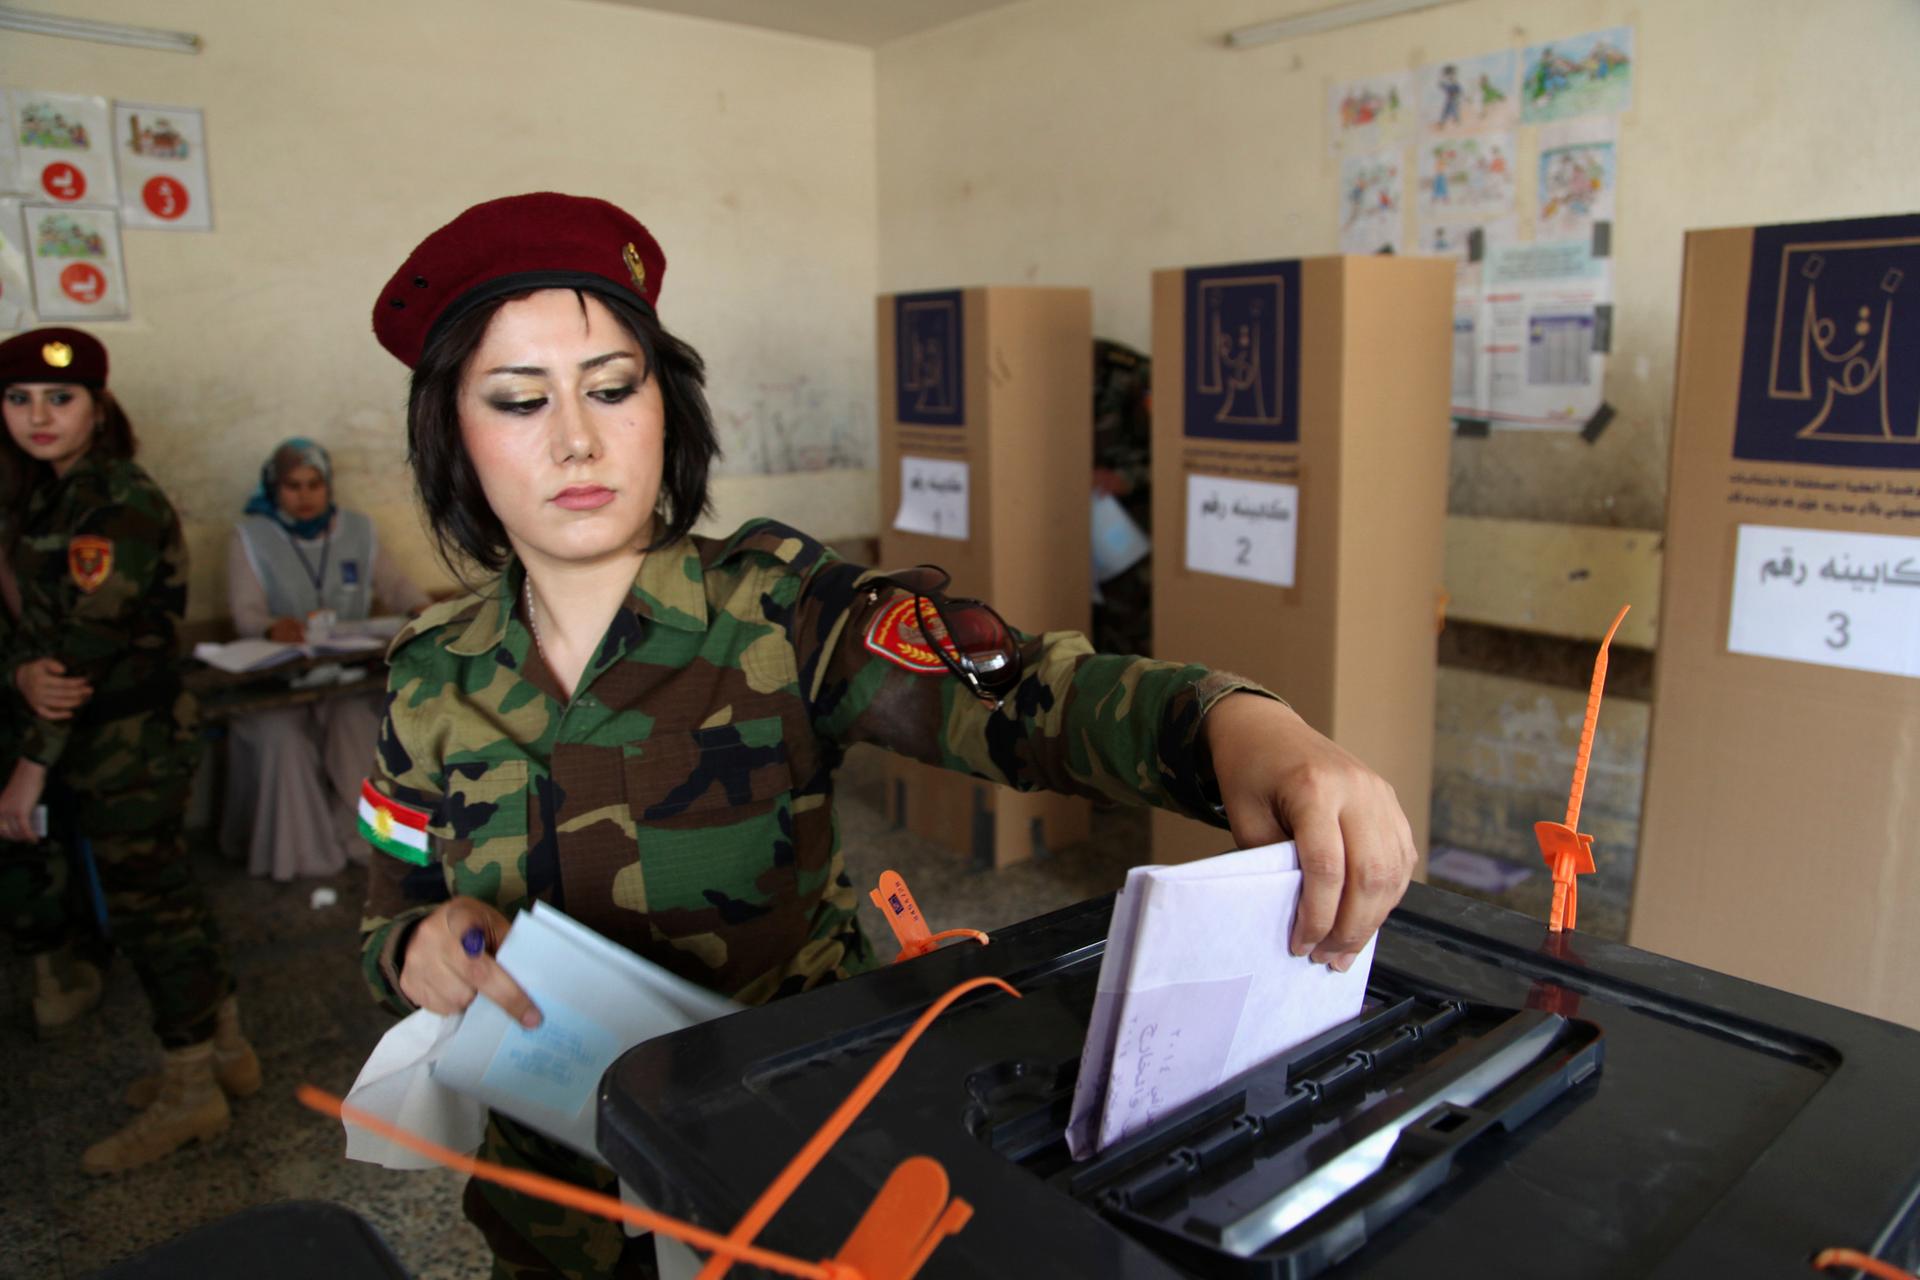 A member of Kurdish security forces casts her ballot inside a polling station during early voting for the parliamentary election in Irbil, in Iraq's Kurdistan region, on April 28, 2014.  